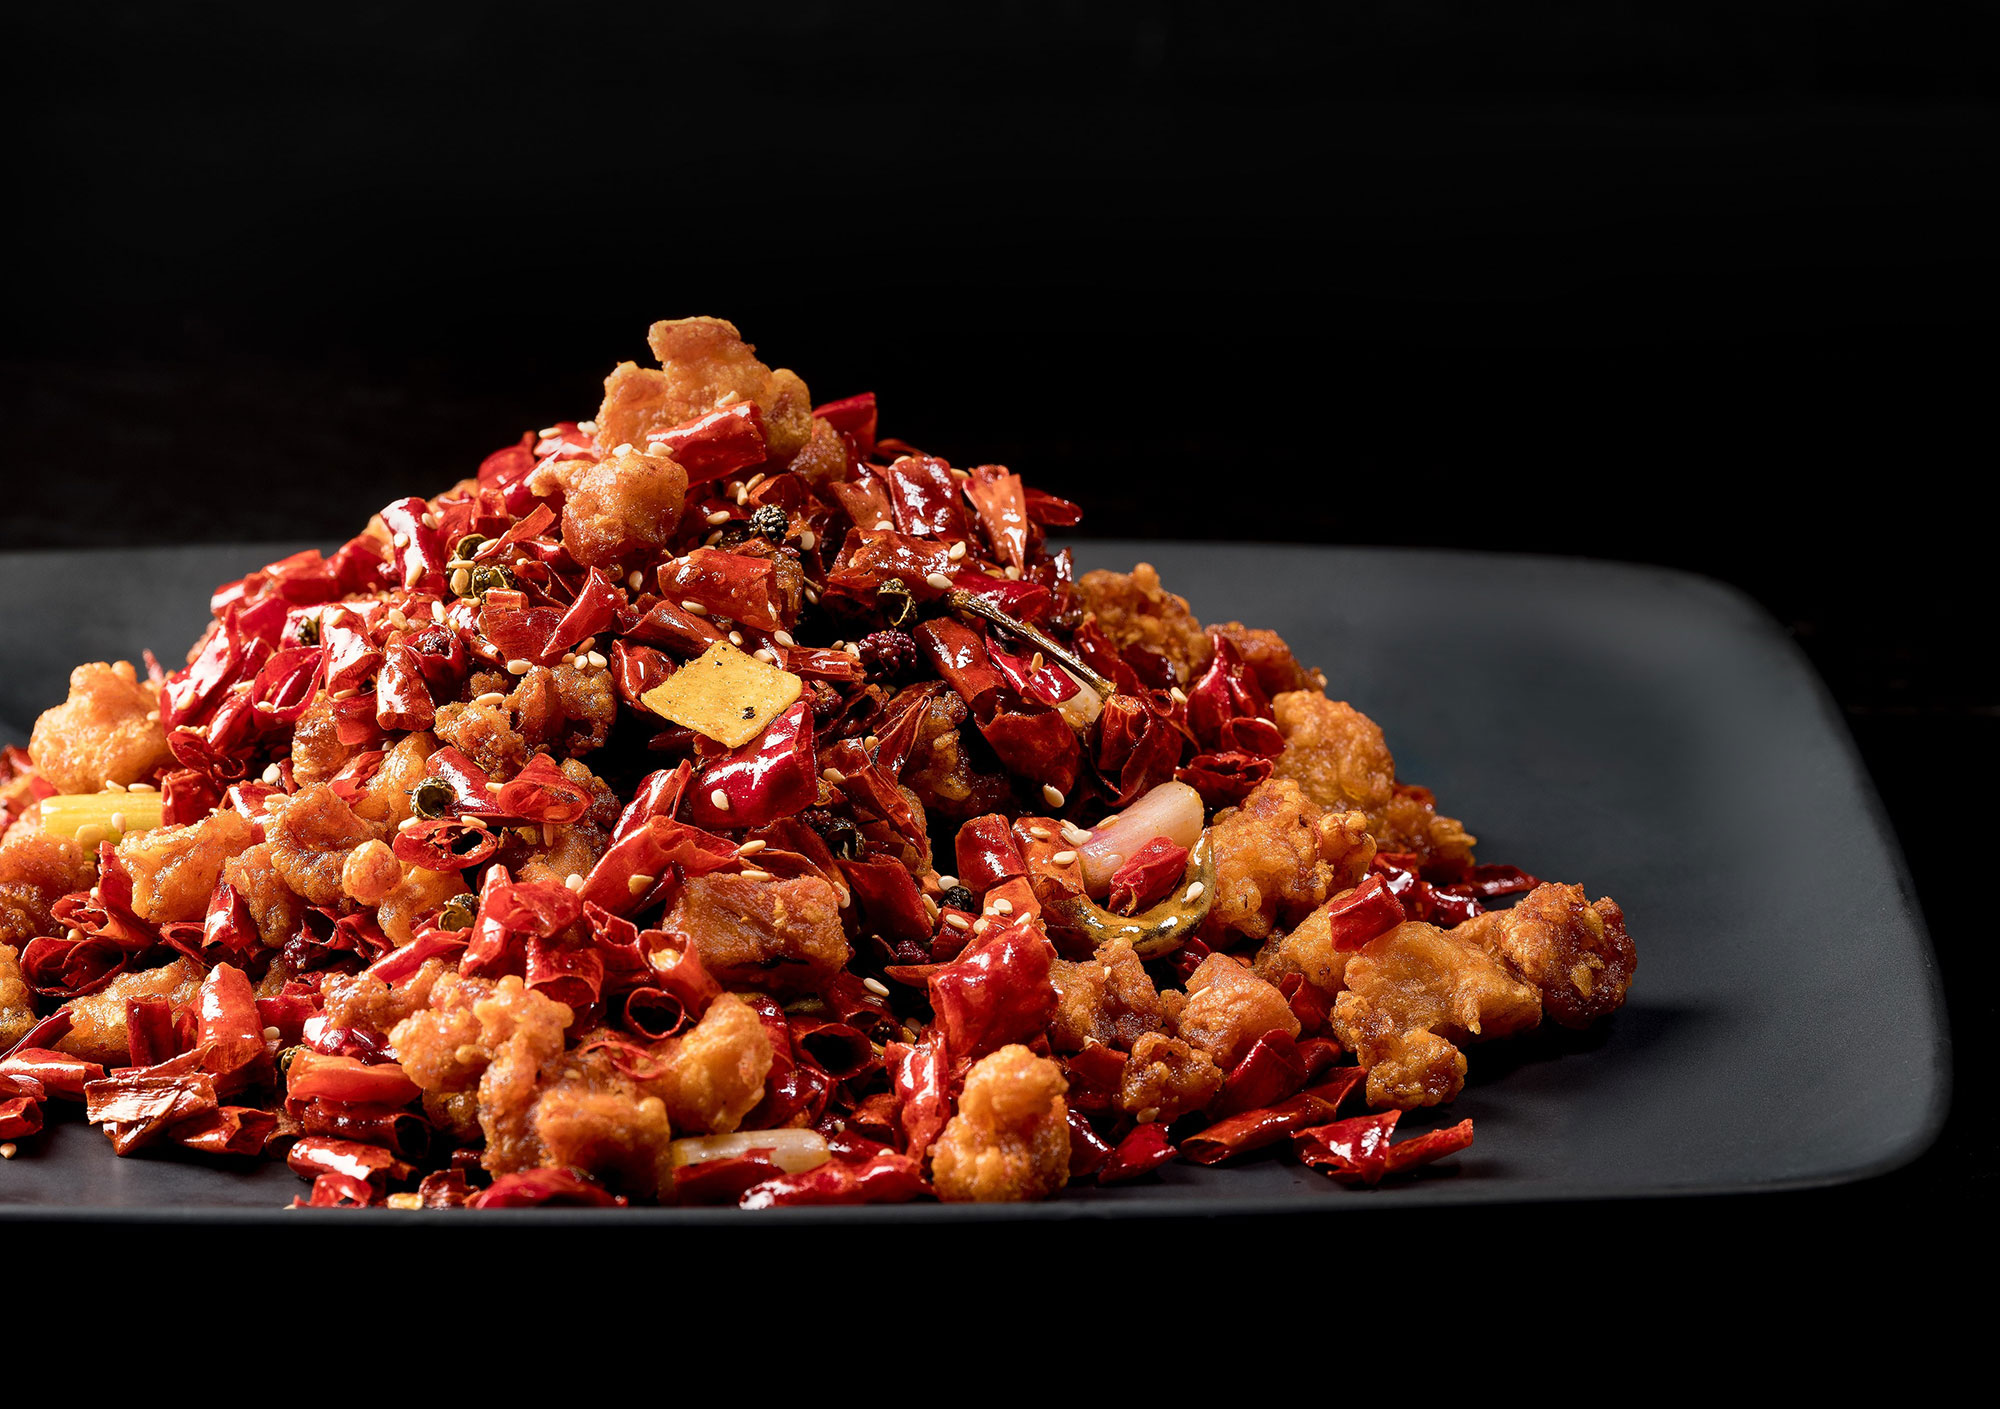 Si-Chuan-Dou-Hua-Restaurant---Chong-Qing-Diced-Chicken-with-Dried-Chilli